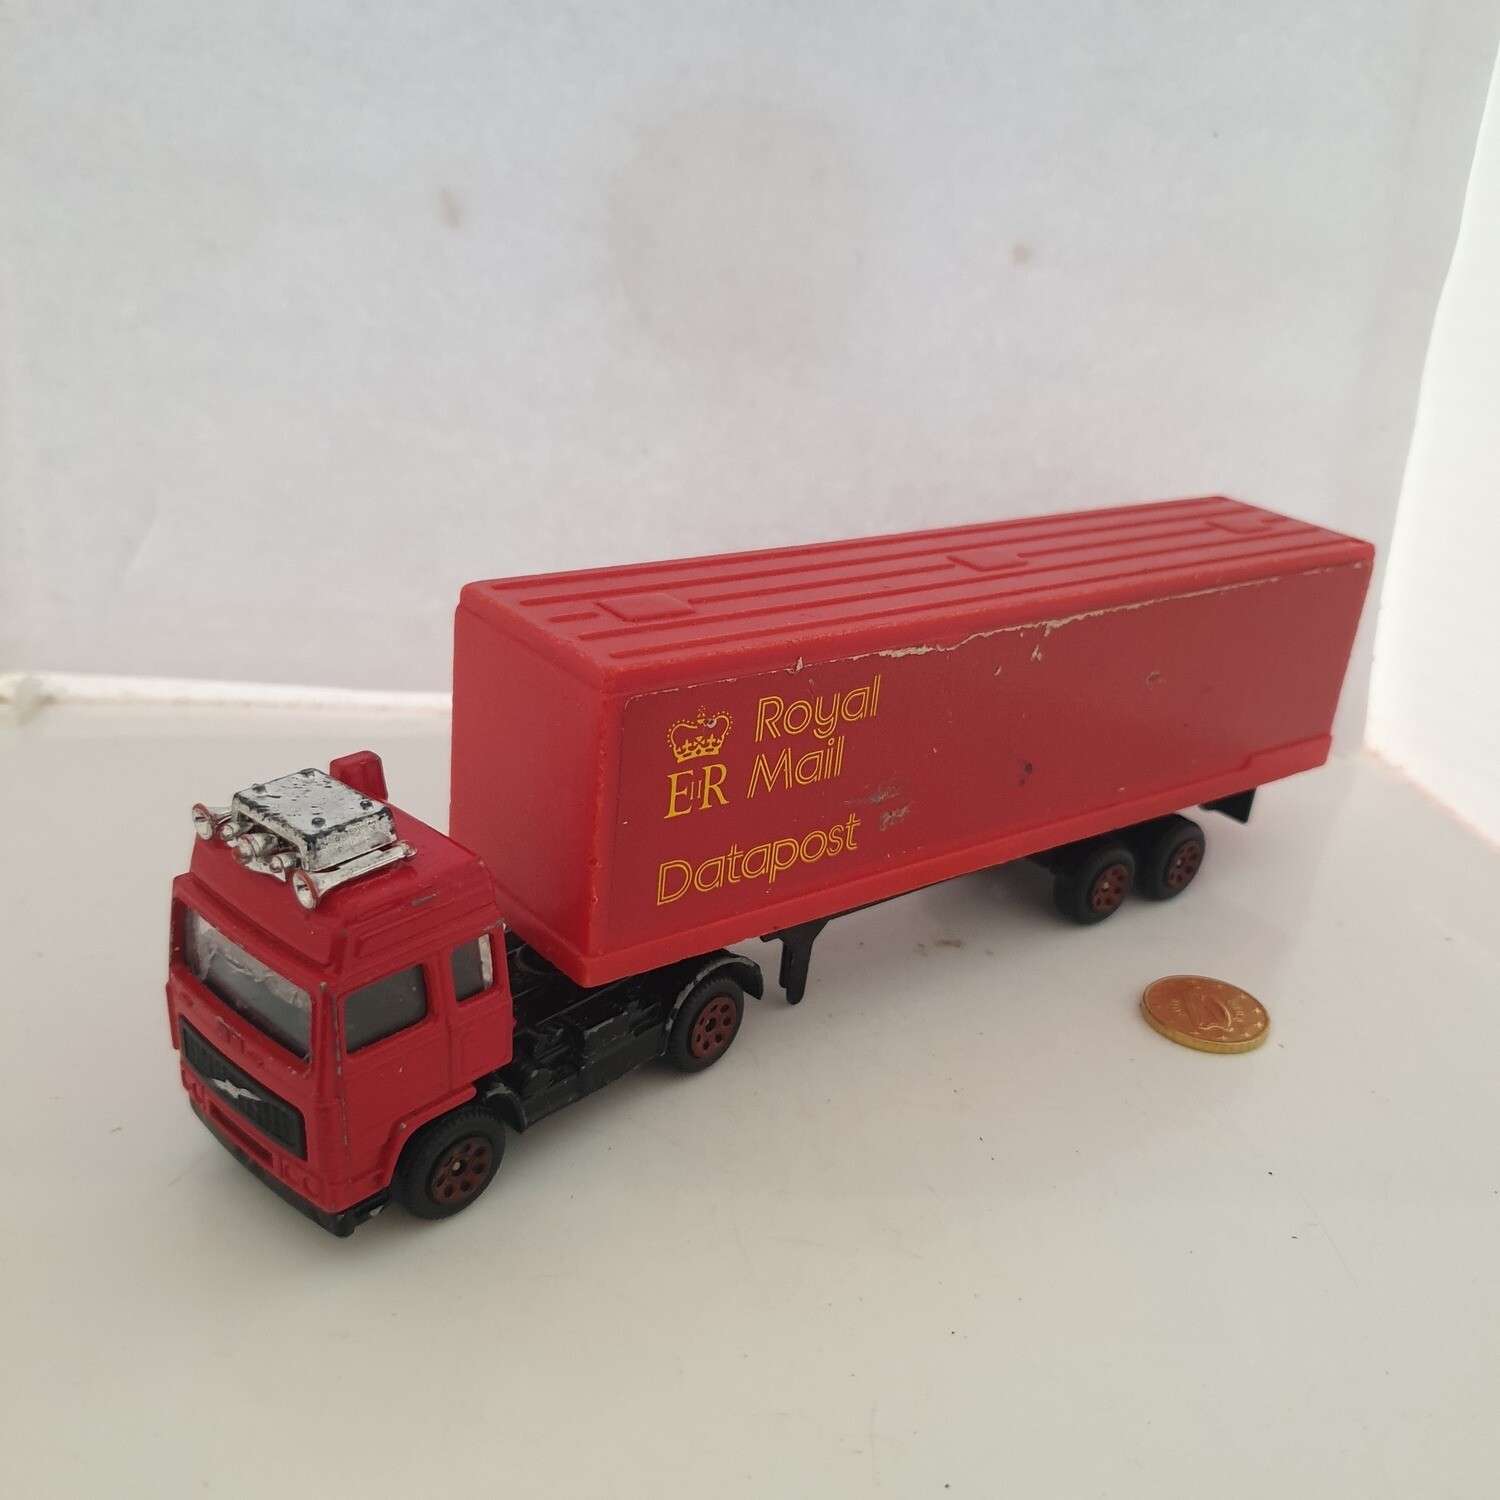 Corgi Royal Mail Cab and Container Truck - no back doors (DQ51)